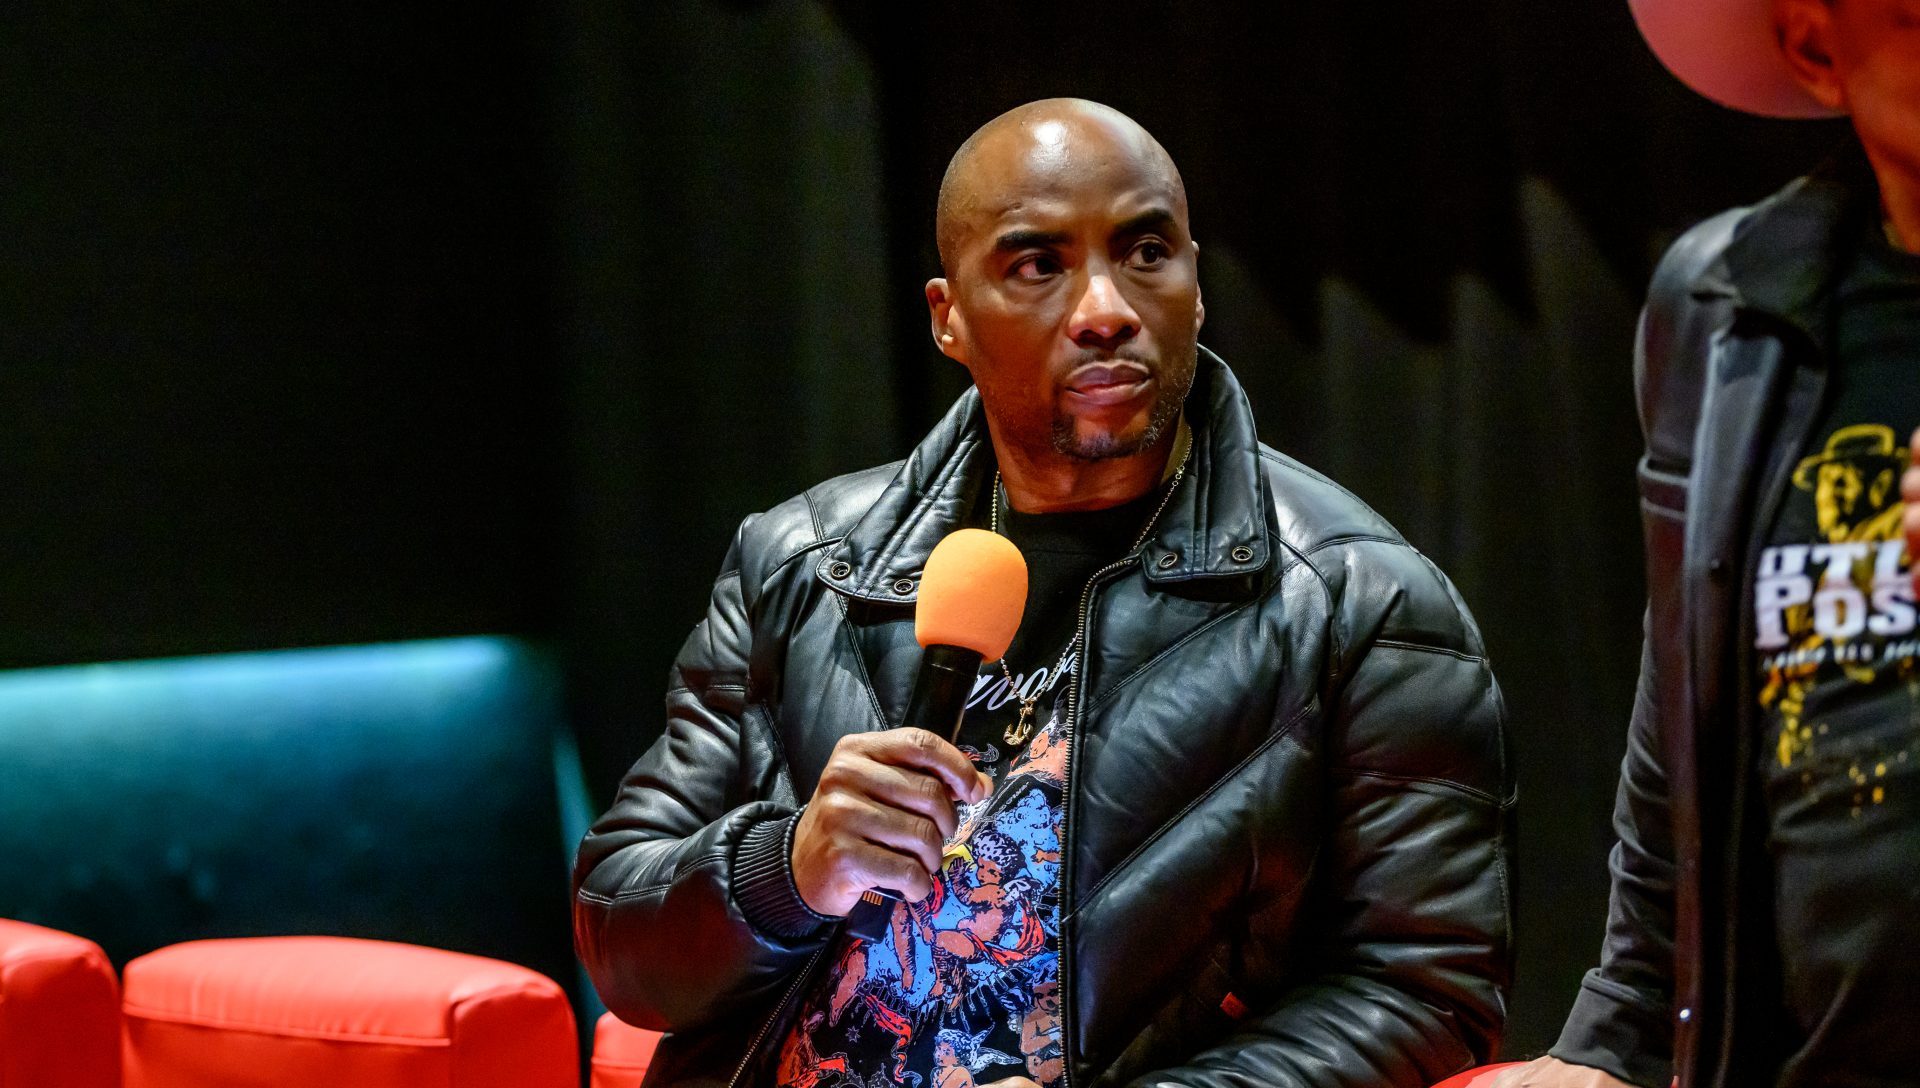 Charlamagne Apologizes To Reesa Teesa For "Big Back" Comment